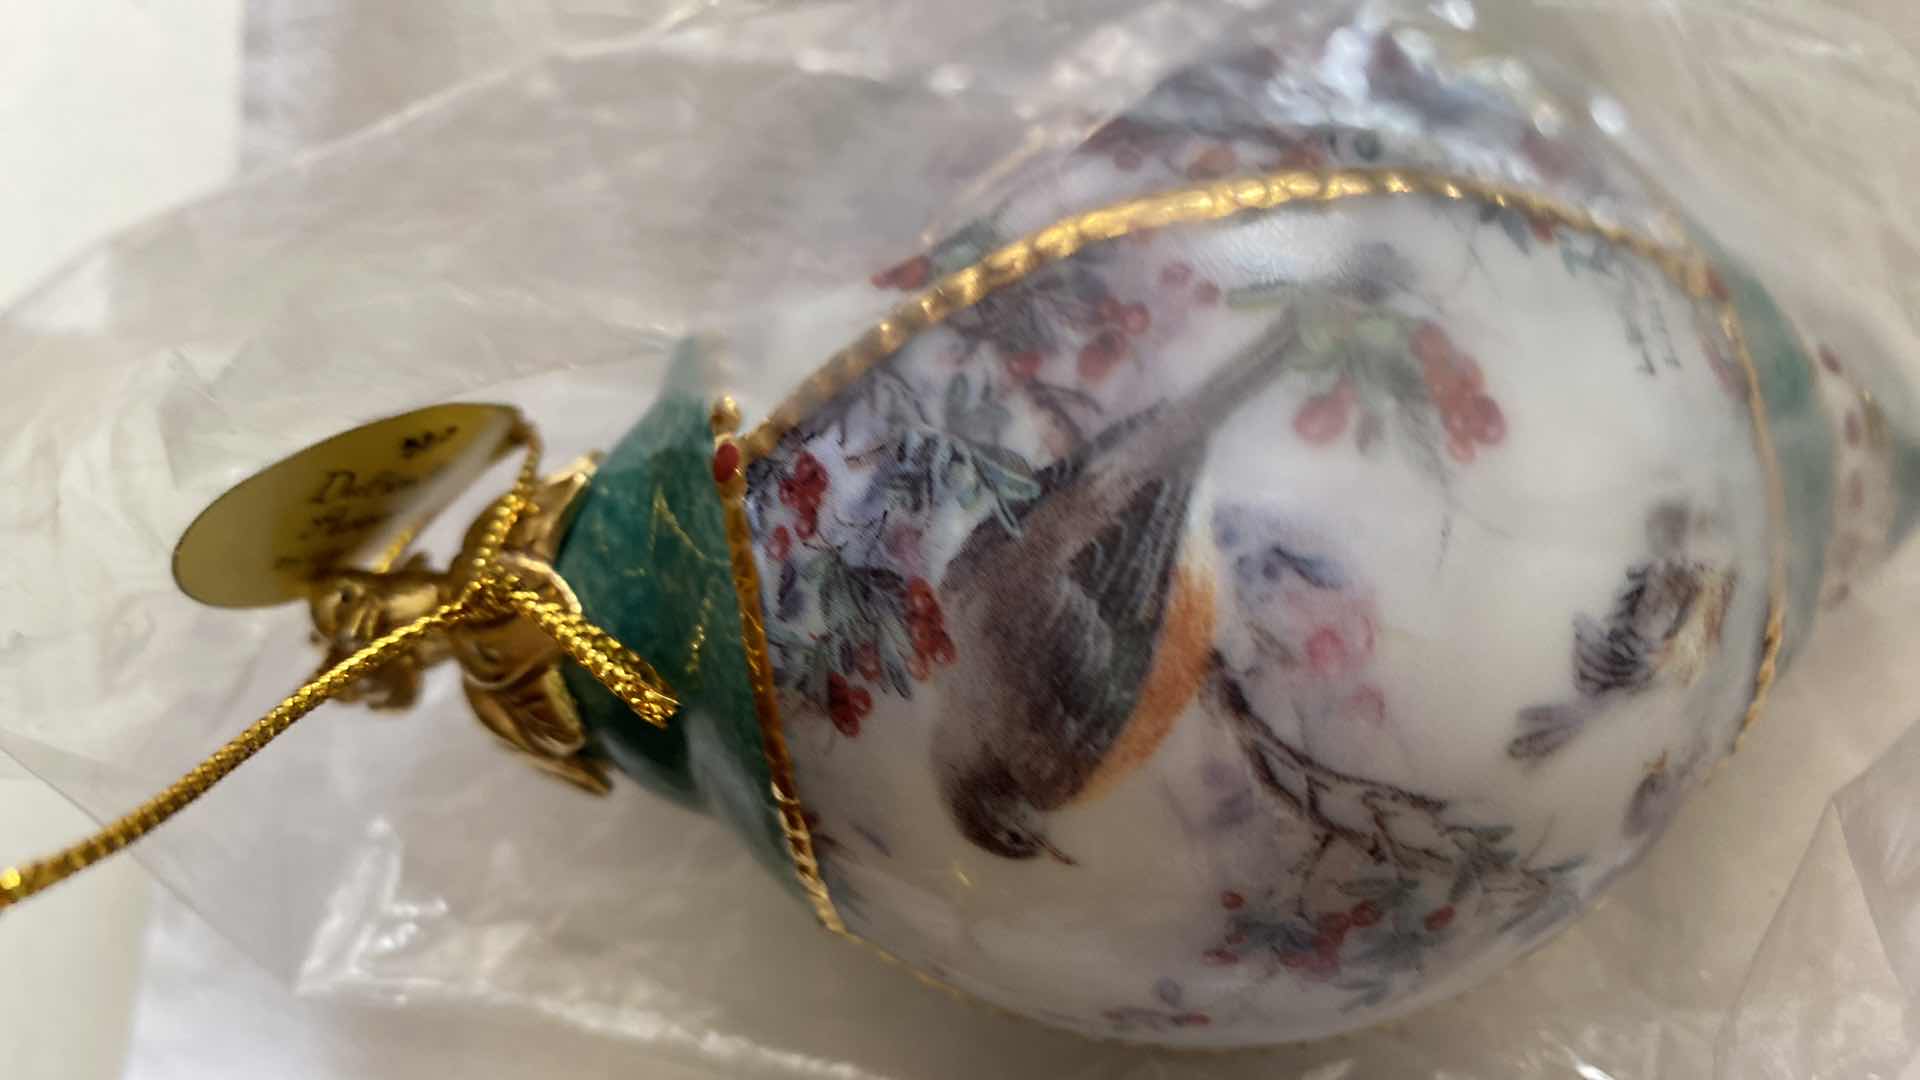 Photo 4 of VINTAGE THREE LENA LIU’s NATURES POETRY PORCELAIN ORNAMENTS COLLECTIBLES BY BRADFORD EXCHANGE WITH CERTIFICATE OF AUTHENTICITY